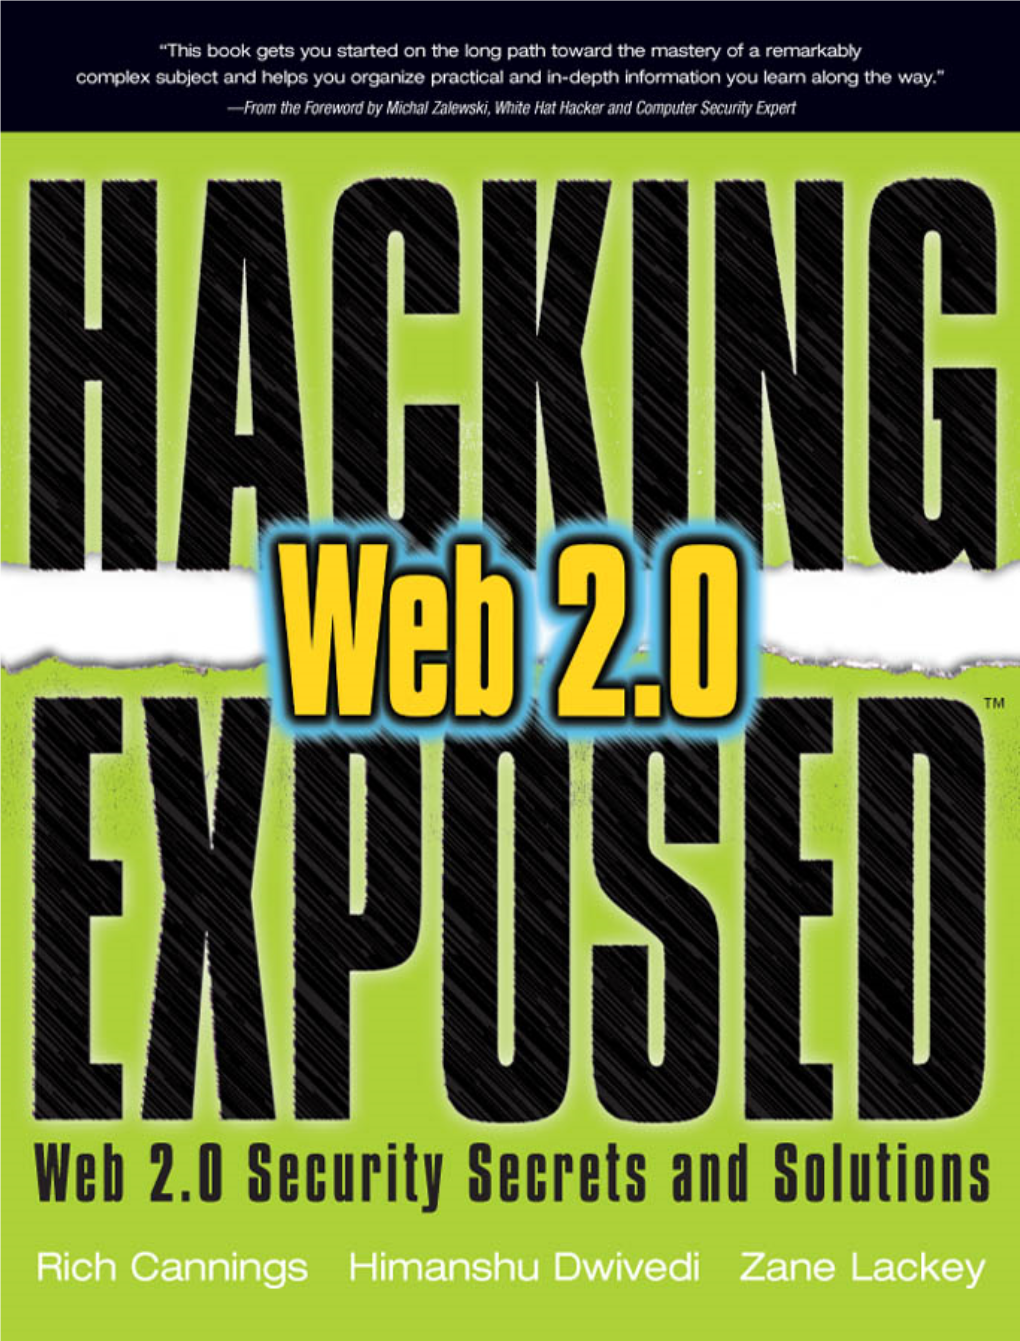 Hacking Exposed-Web